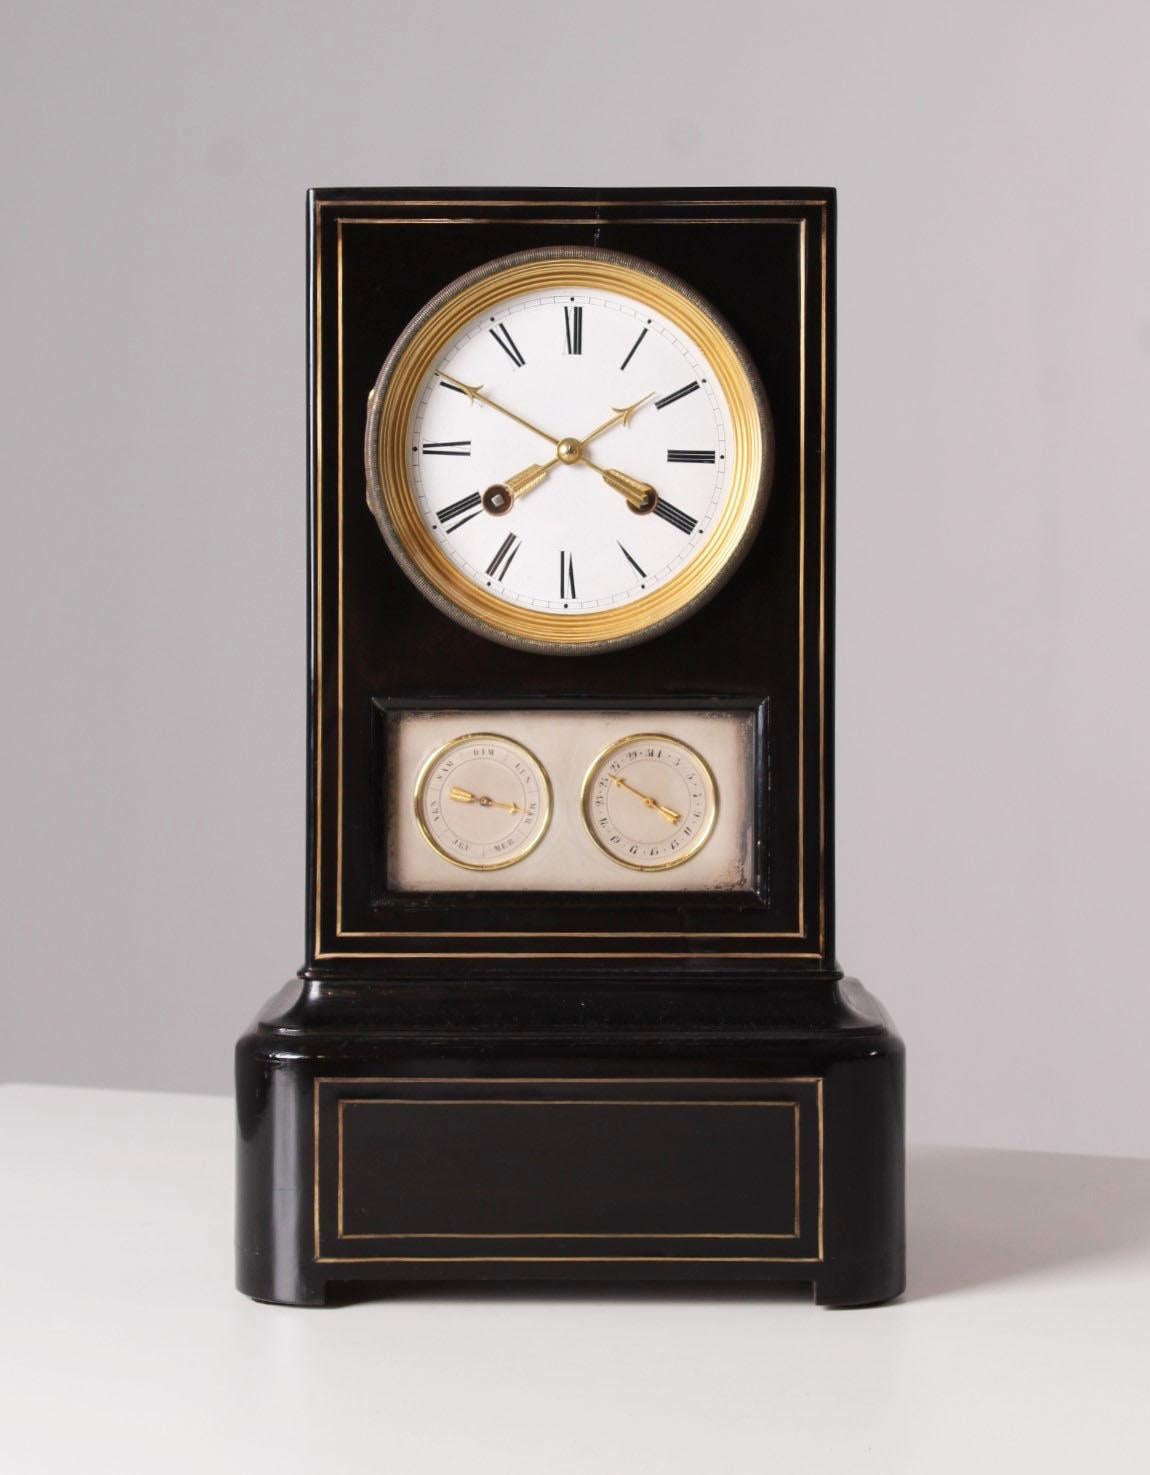 Antique mantel clock with calendar in ebonised wood.

France
Wood, brass
Mid 19th century

Dimensions: H x W x D: 37 x 22 x 17 cm

Description:
French mantel clock from around 1840-1860.

The case is made of ebonised wood with brass